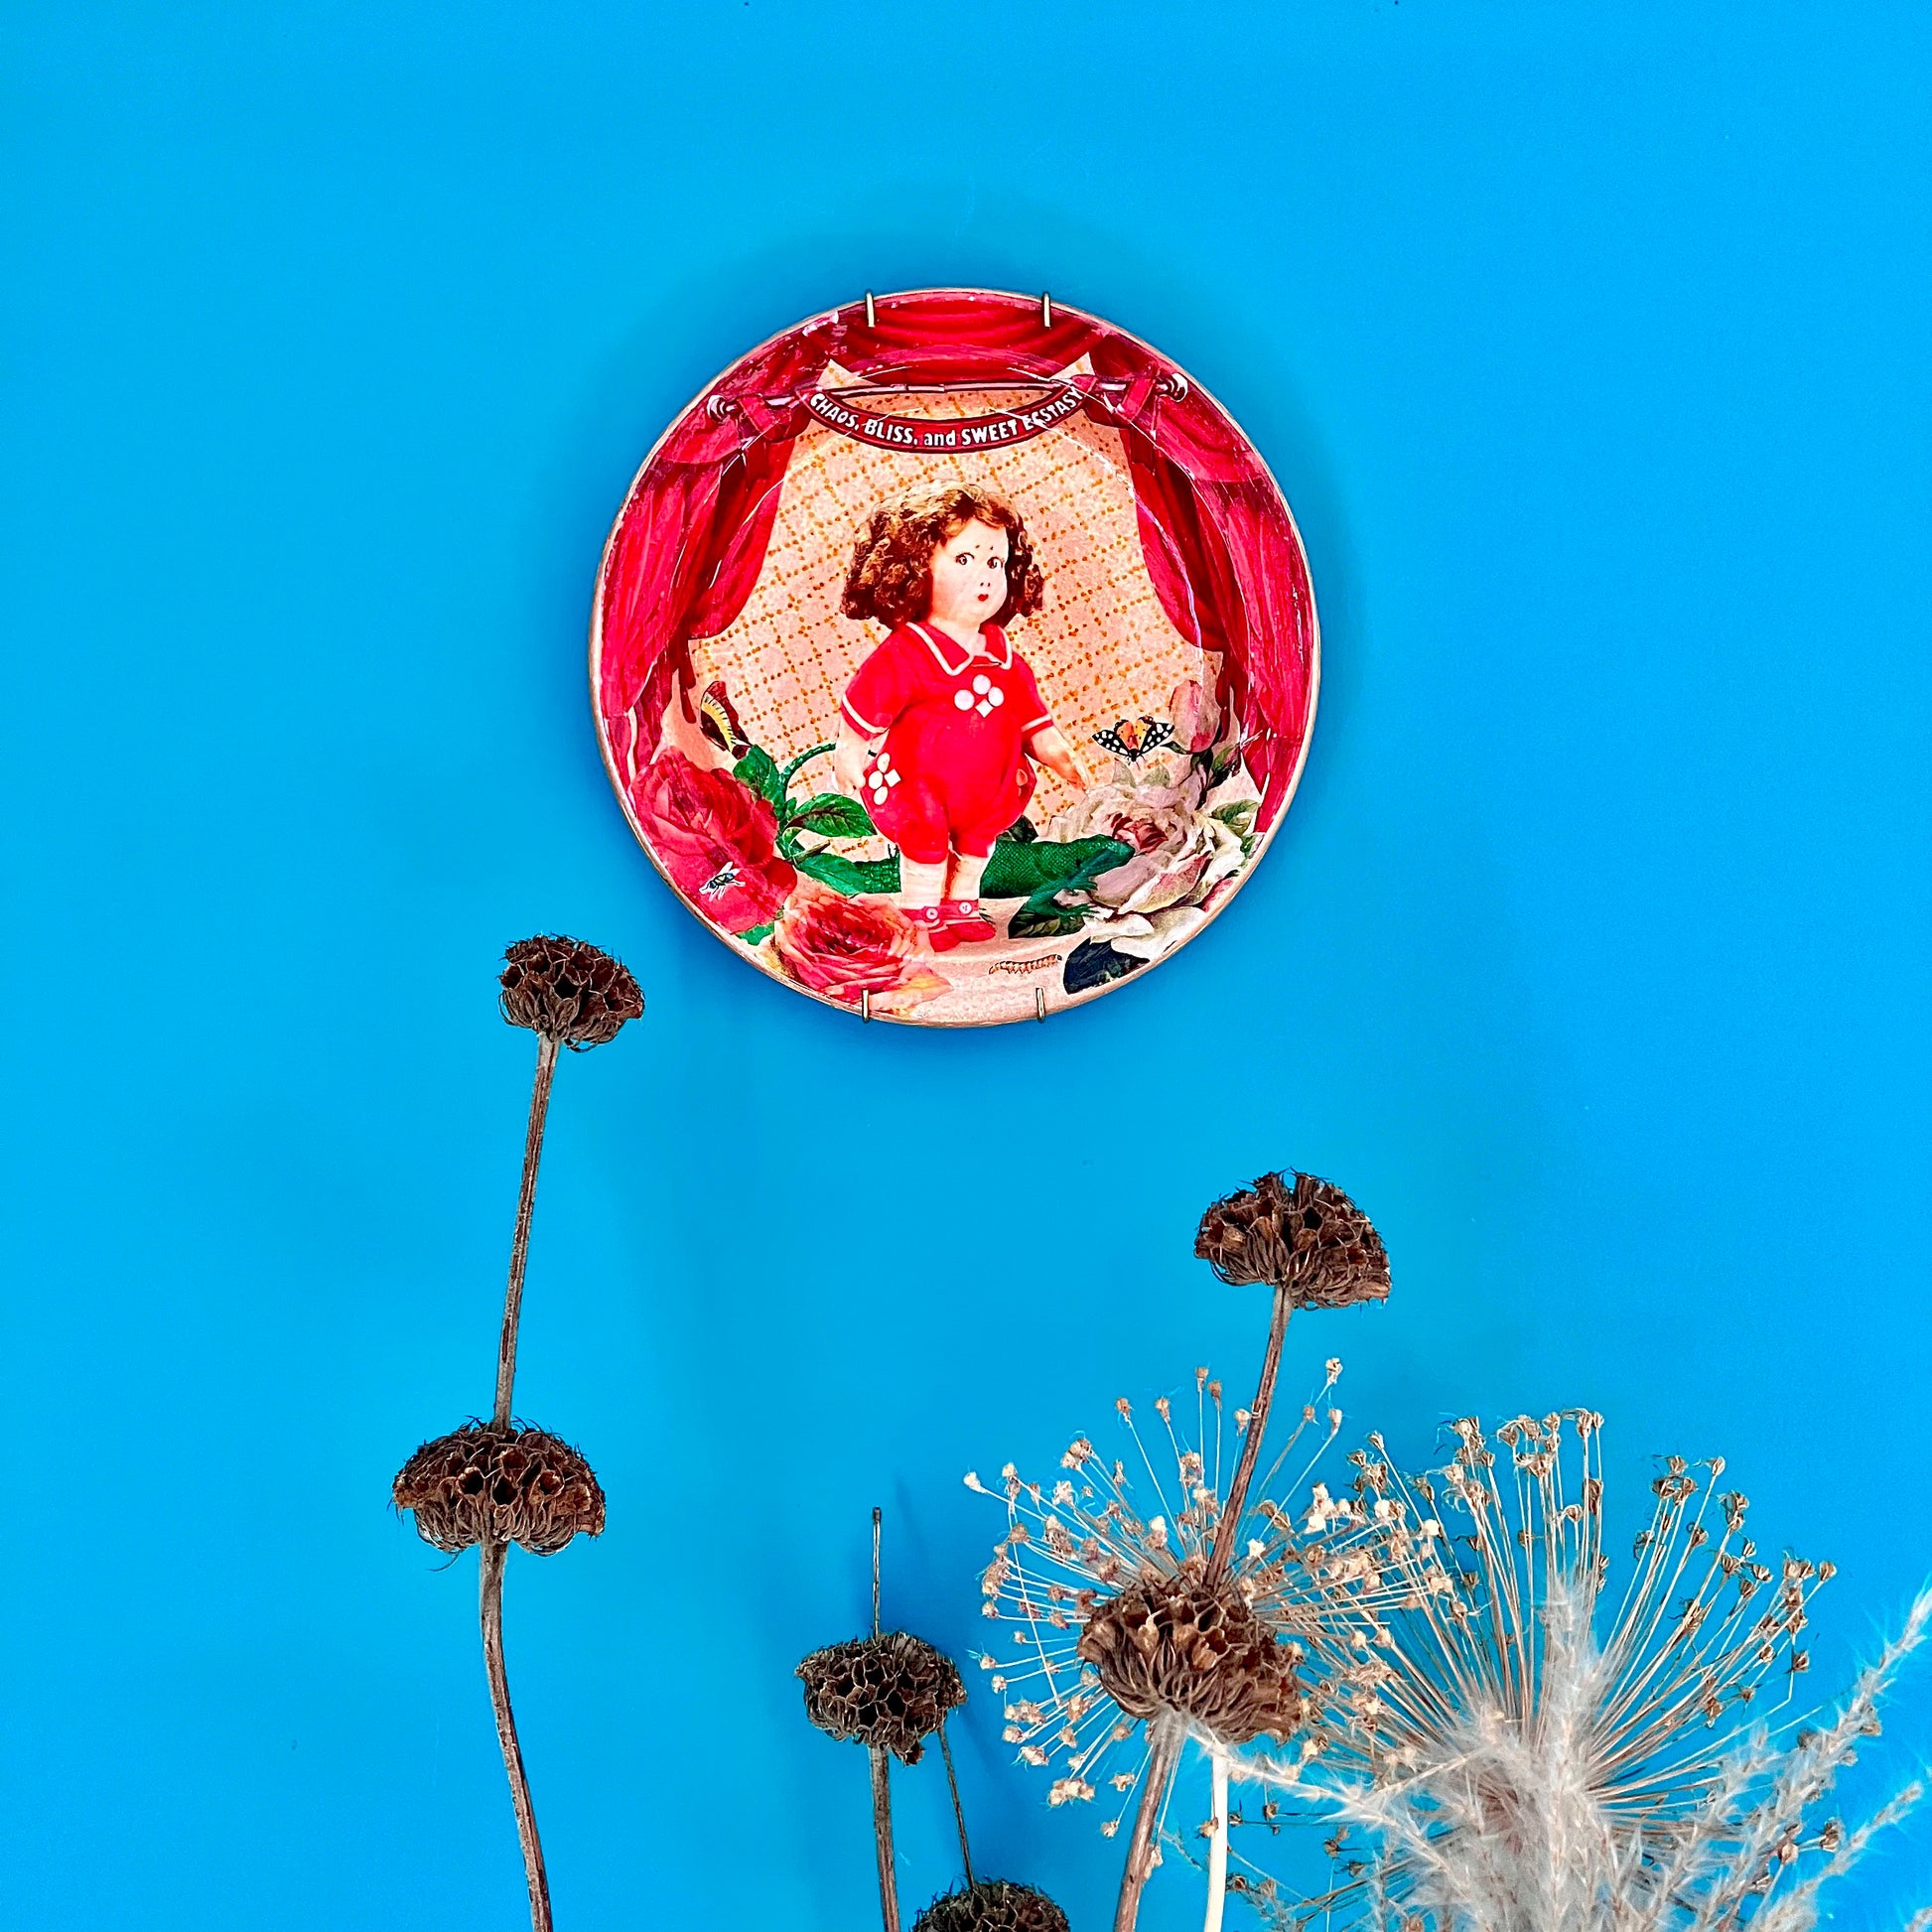 Chaos, Bliss, and Sweet Ecstasy Wall Plate by House of Frisson, hanging on a blue wallpaper.